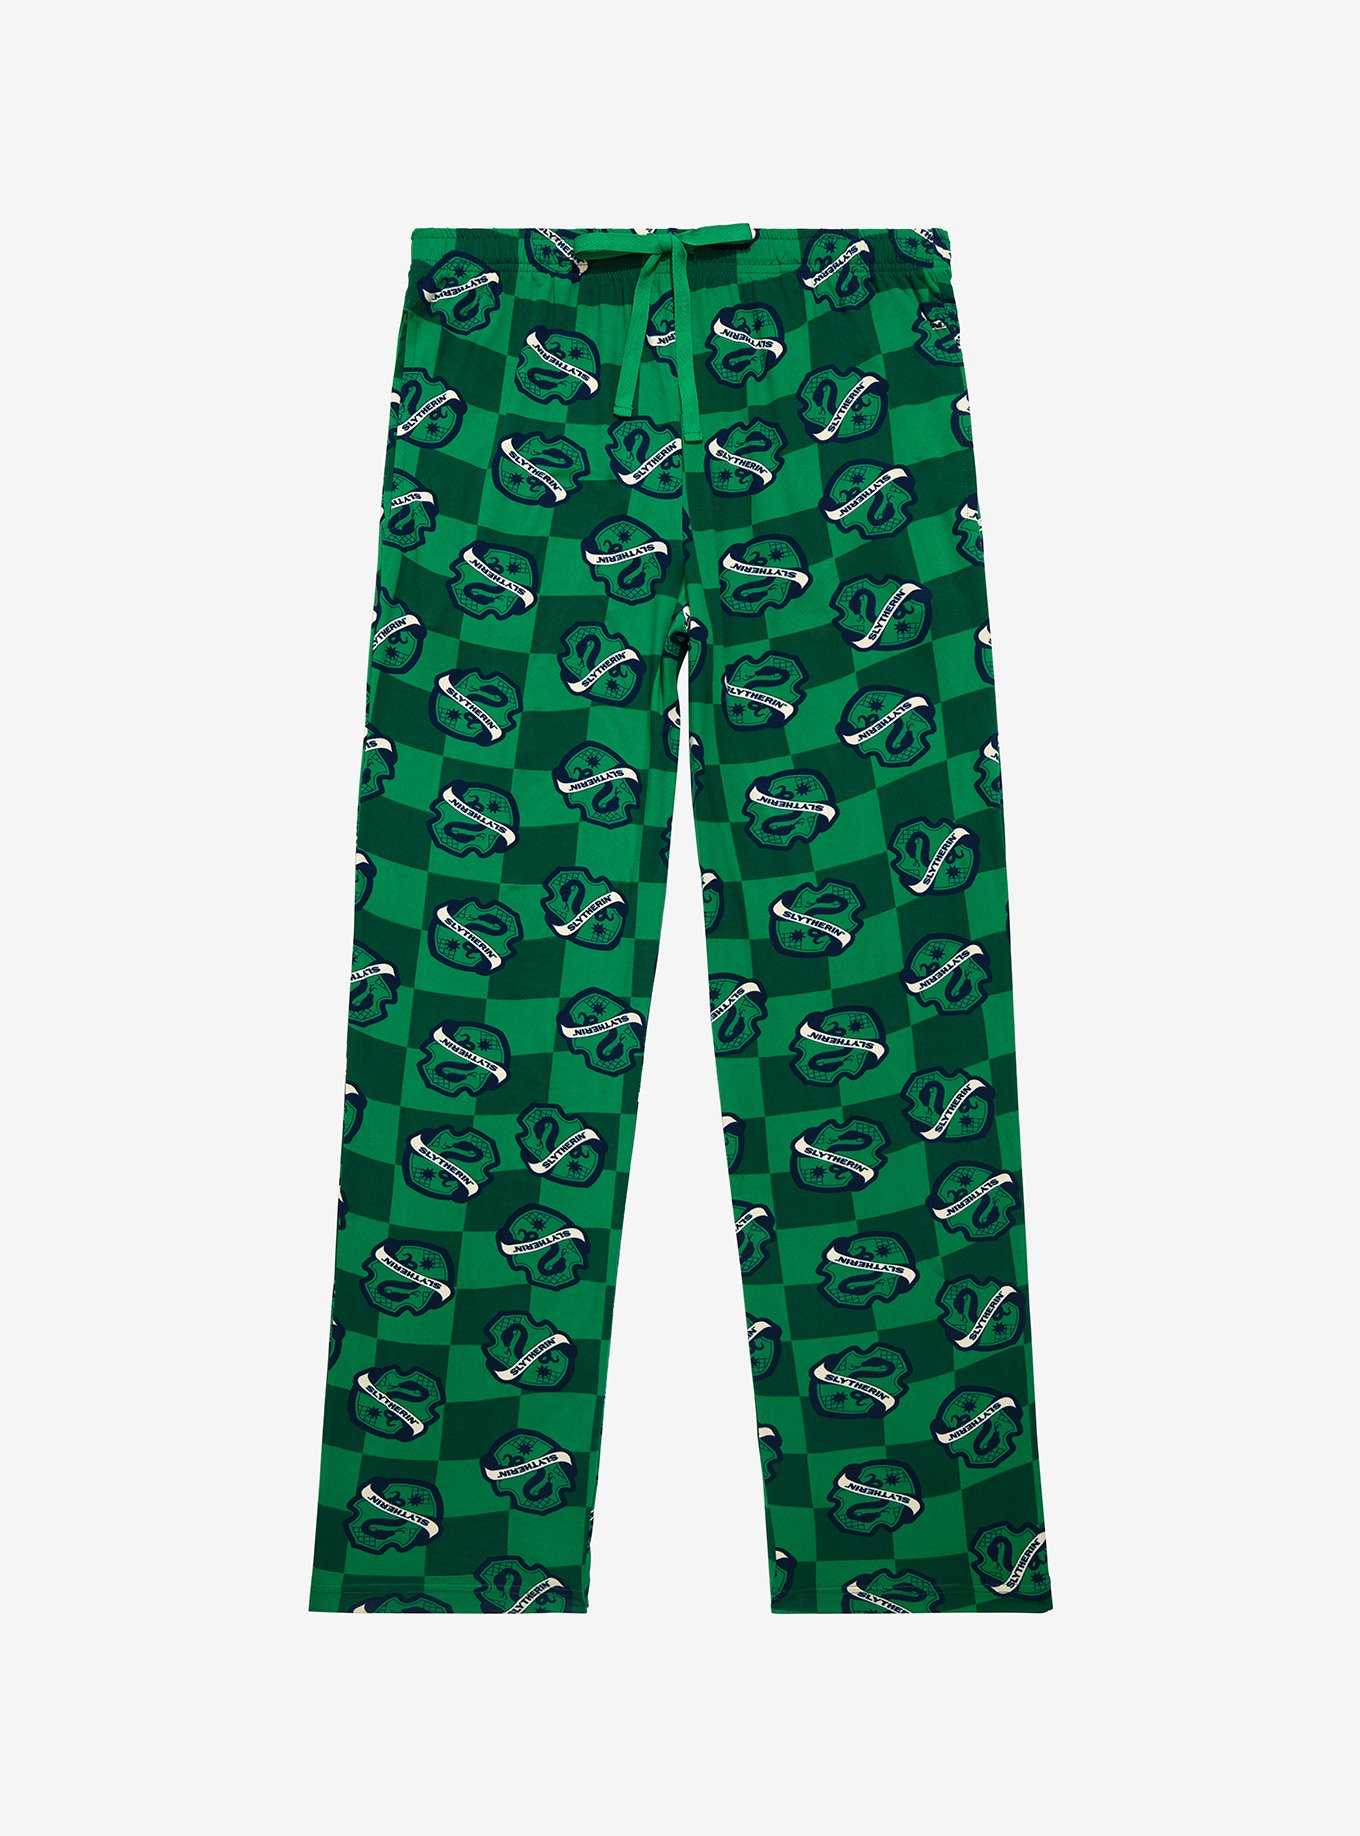 Harry Potter Slytherin House Crest Checkered Sleep Pants - BoxLunch Exclusive , , hi-res